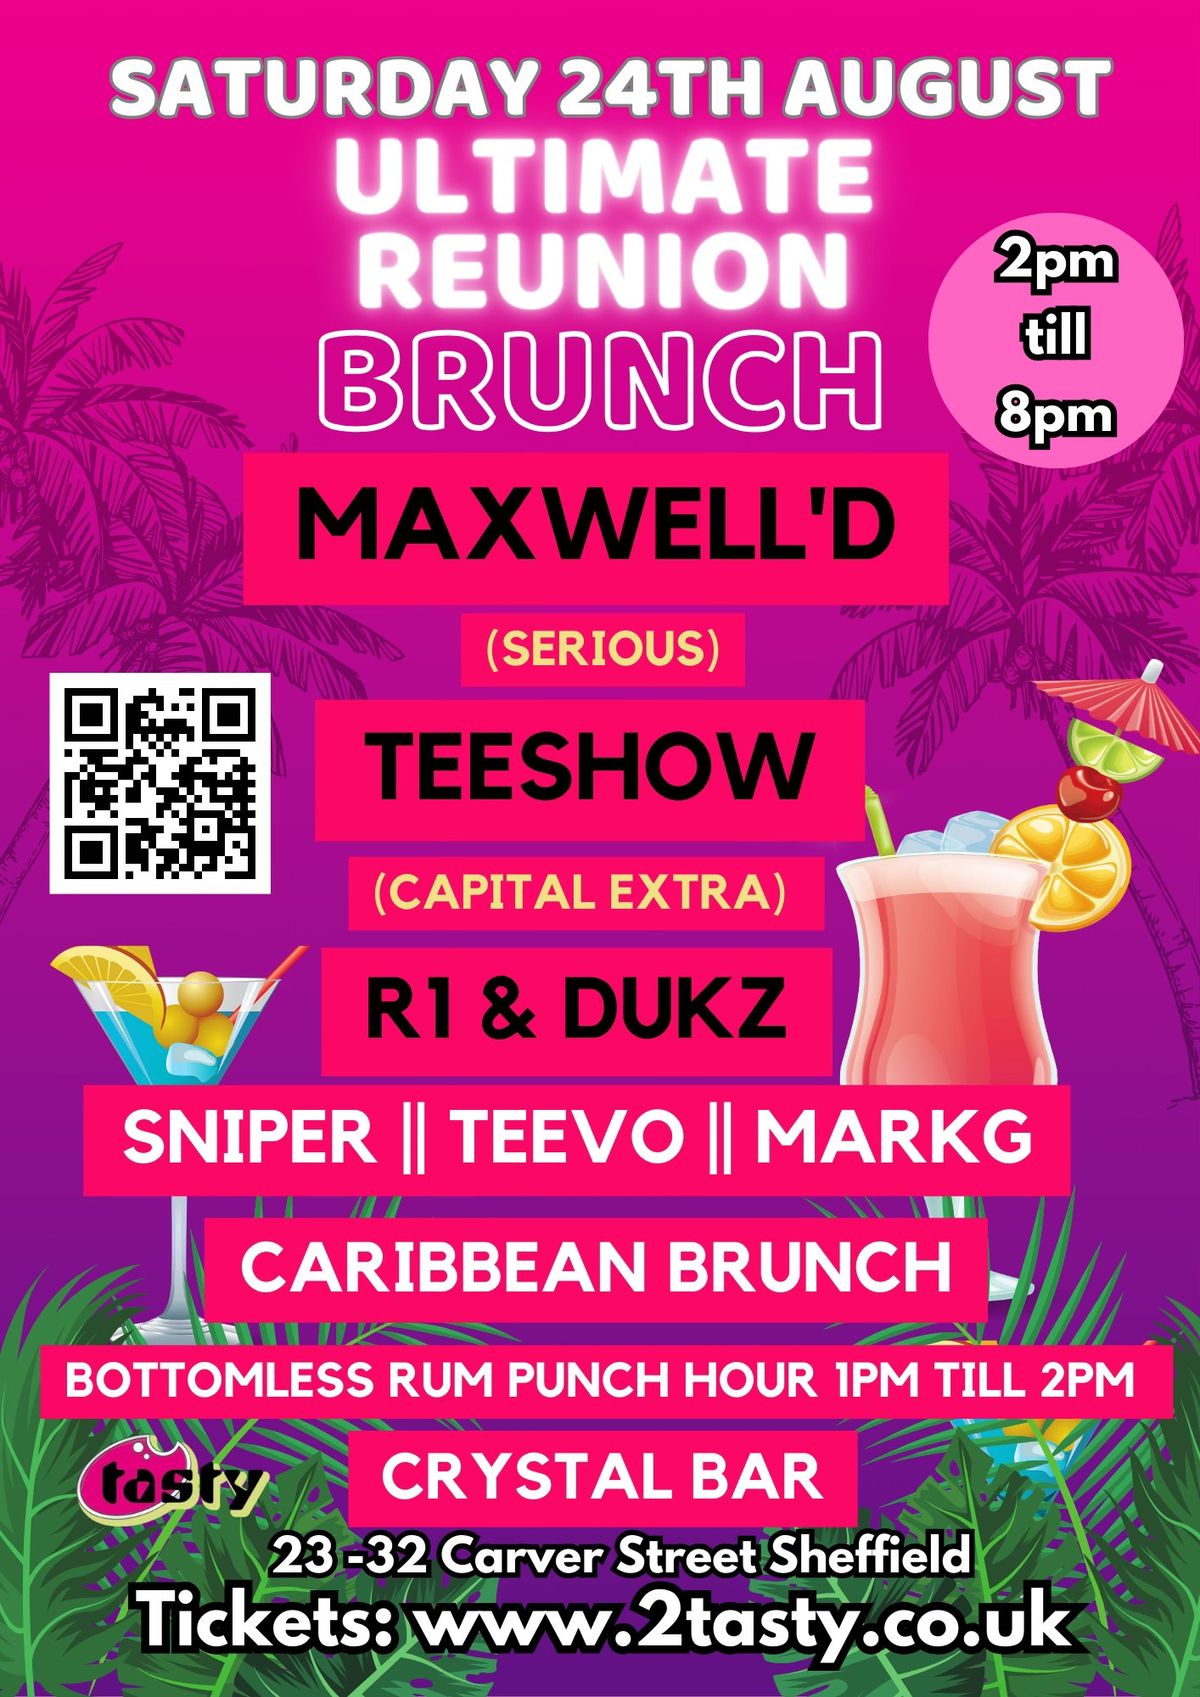 Ultimate Reunion Brunch with MAXWELL D and TEESHOW Capital Extra